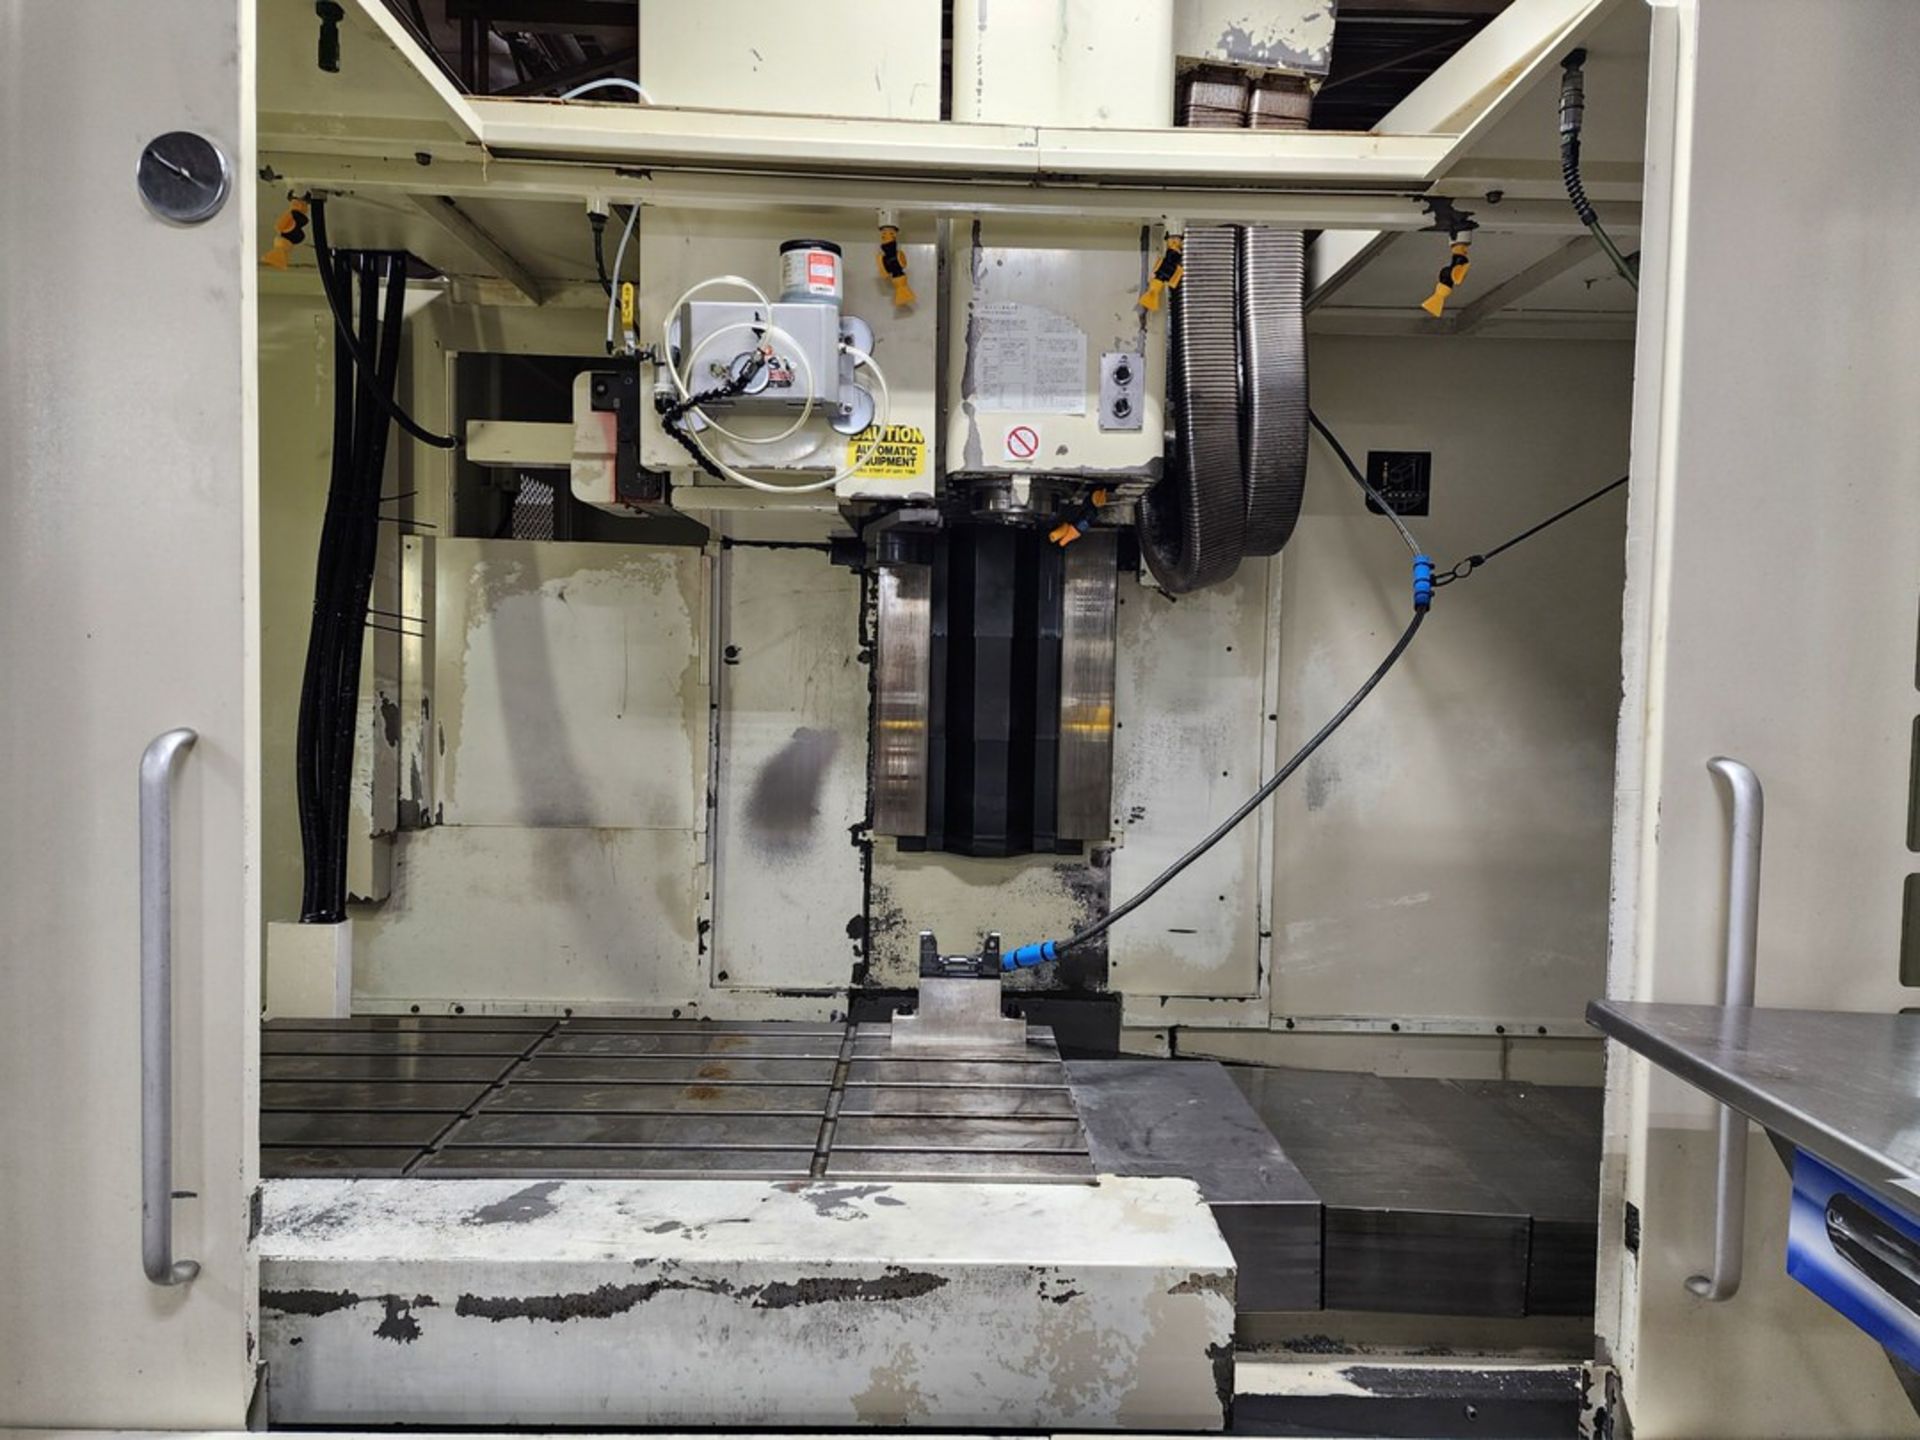 2008 Kitamura 7HiF Vertical Machining Center W/ Fanuc Series 16i-MB; 30,000 Spindle Speed; - Image 5 of 23